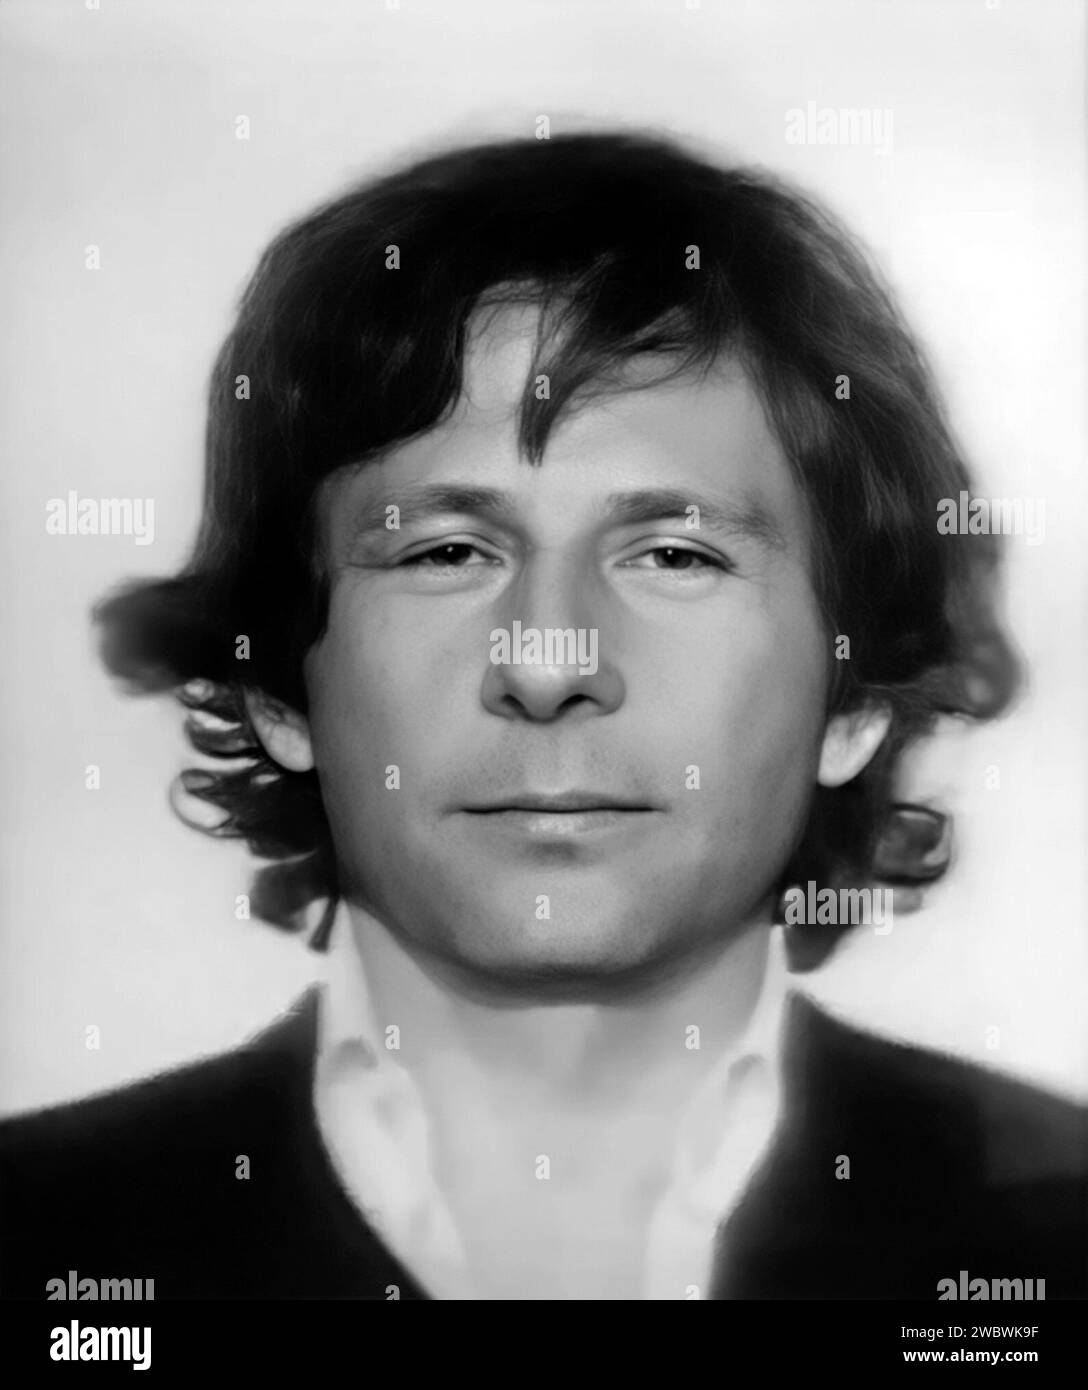 Roman Polanski. Police mugshot of the French and Polish film director, Raymond Roman Thierry Polański (né Liebling;1933), after his arrest in 1977 Stock Photo